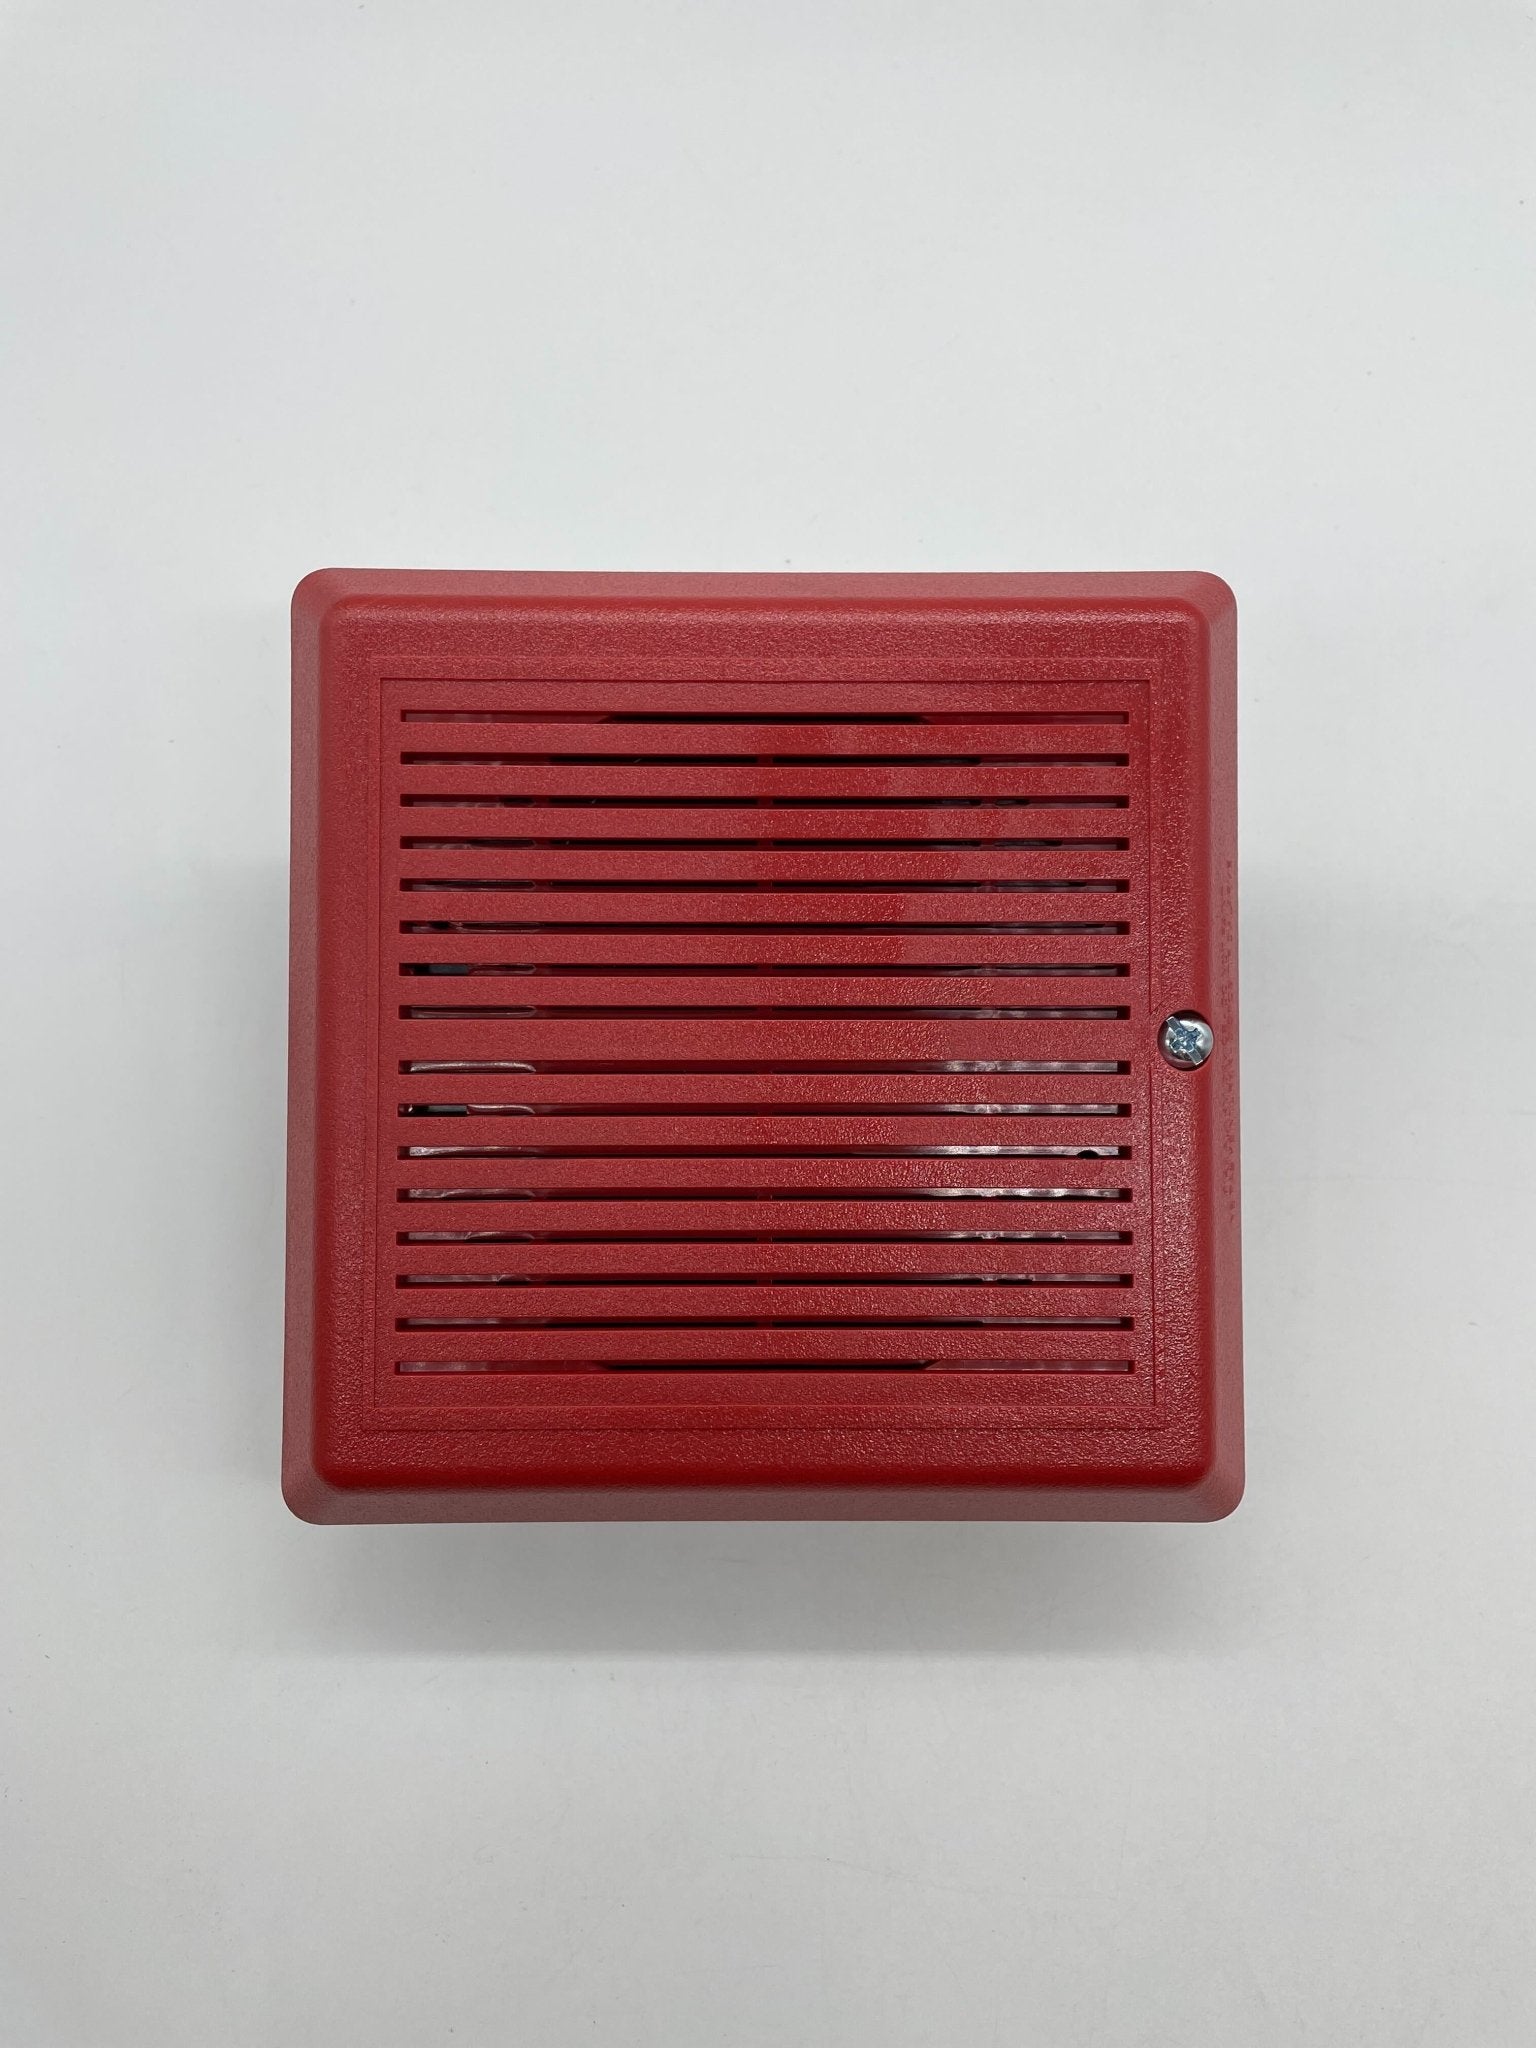 Edwards 757-1A-T - The Fire Alarm Supplier